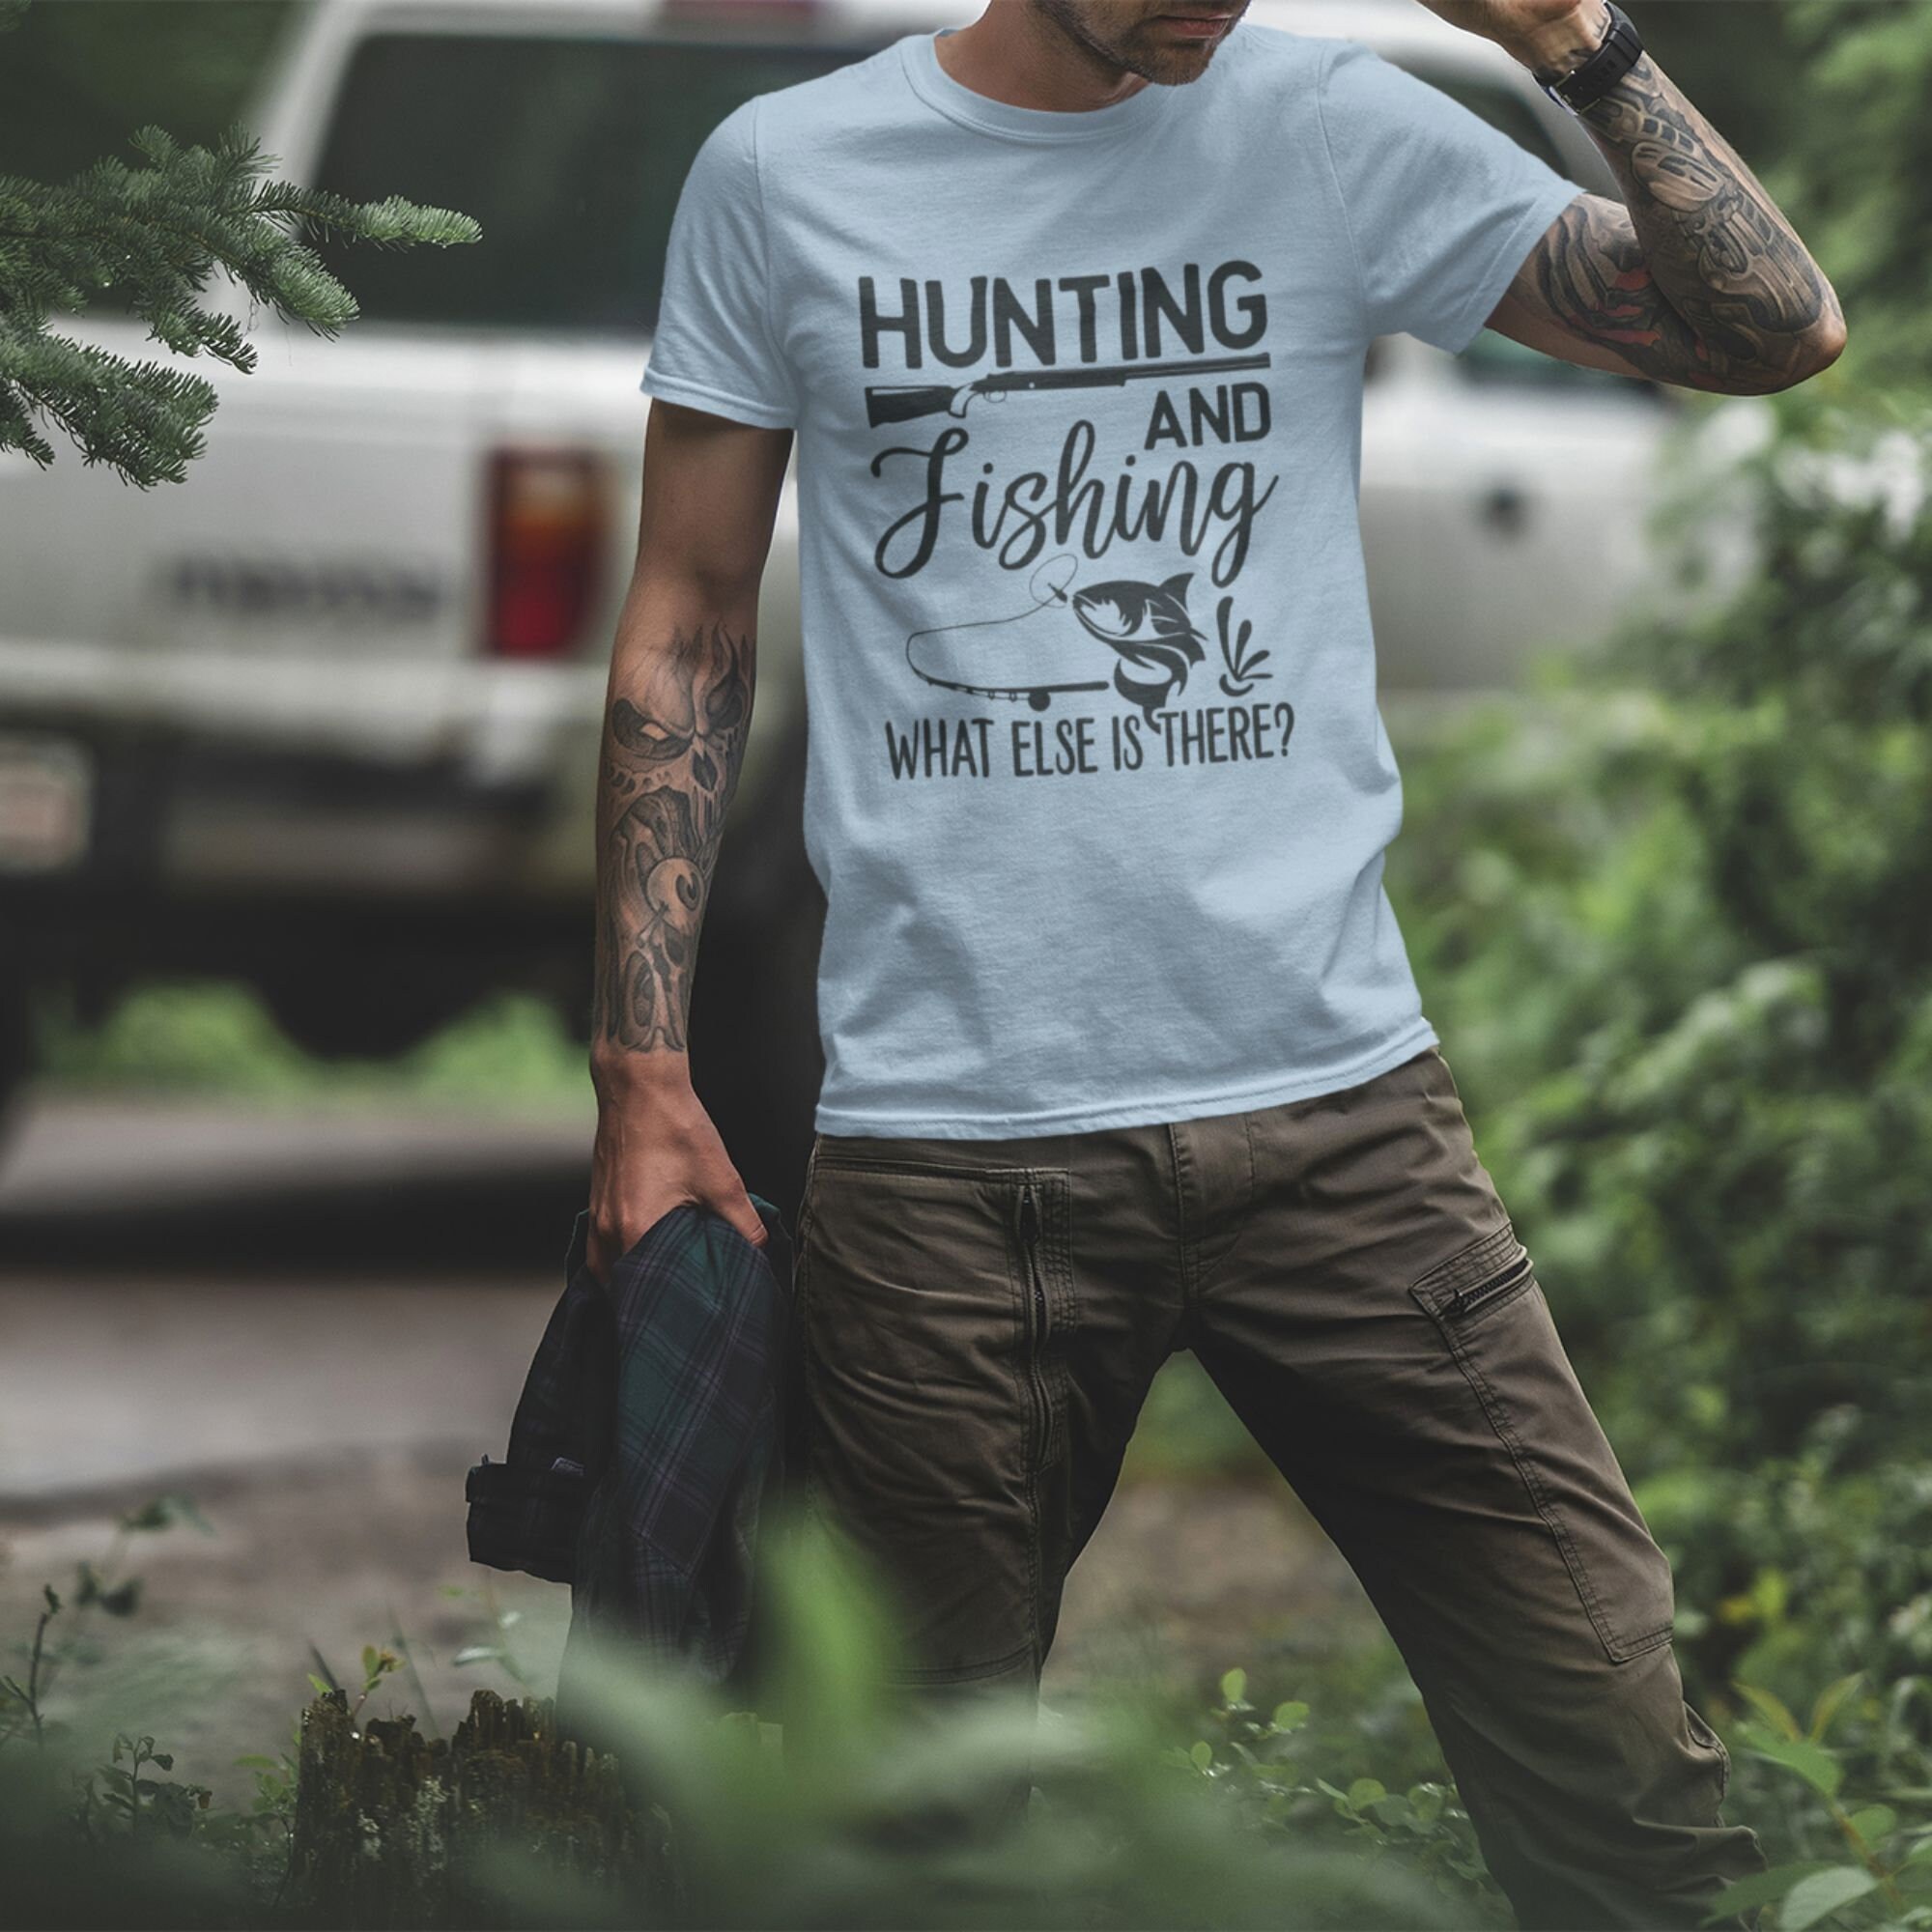 Hunting and Fishing T-shirt, Gift for Husband, Anniversary Gift for Hubby, Mens  Hunting Trip Shirt, Mens Hunting Tee, Fishing Gift 